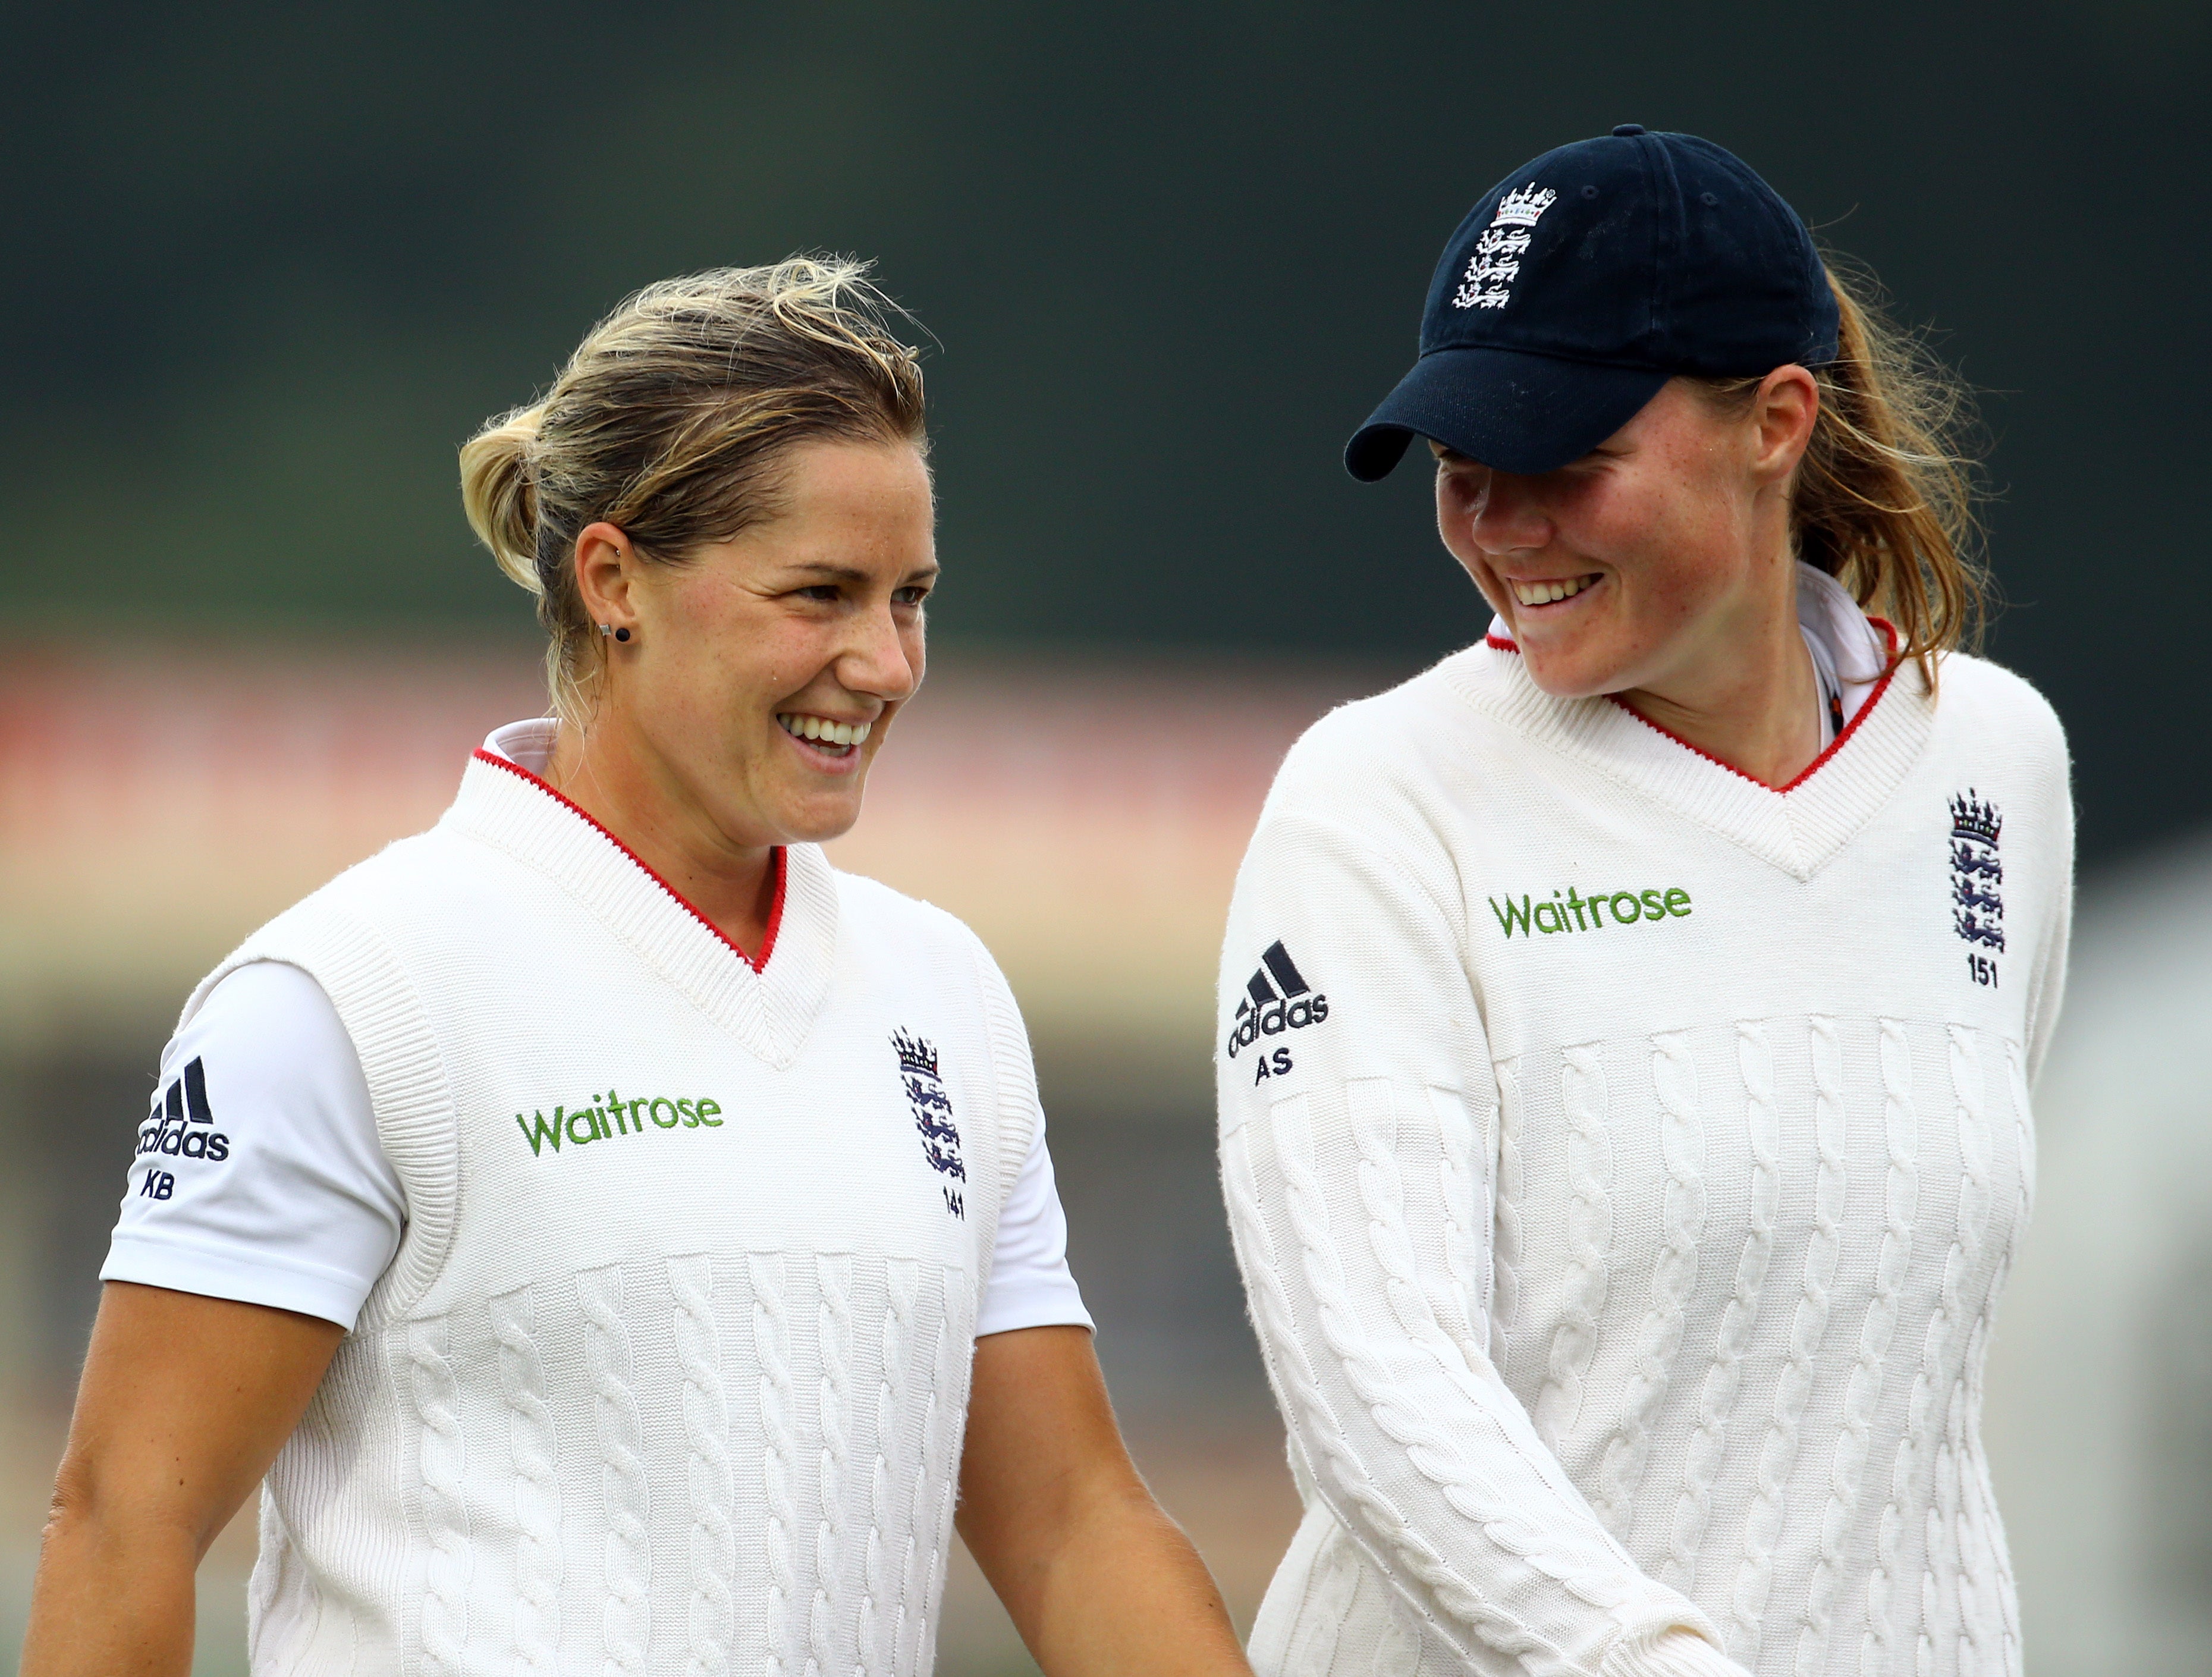 England have seen long-time new-ball partners Katherine Brunt (left) and Anya Shrubsole (right) depart the Test scene in recent months (Gareth Fuller/PA)